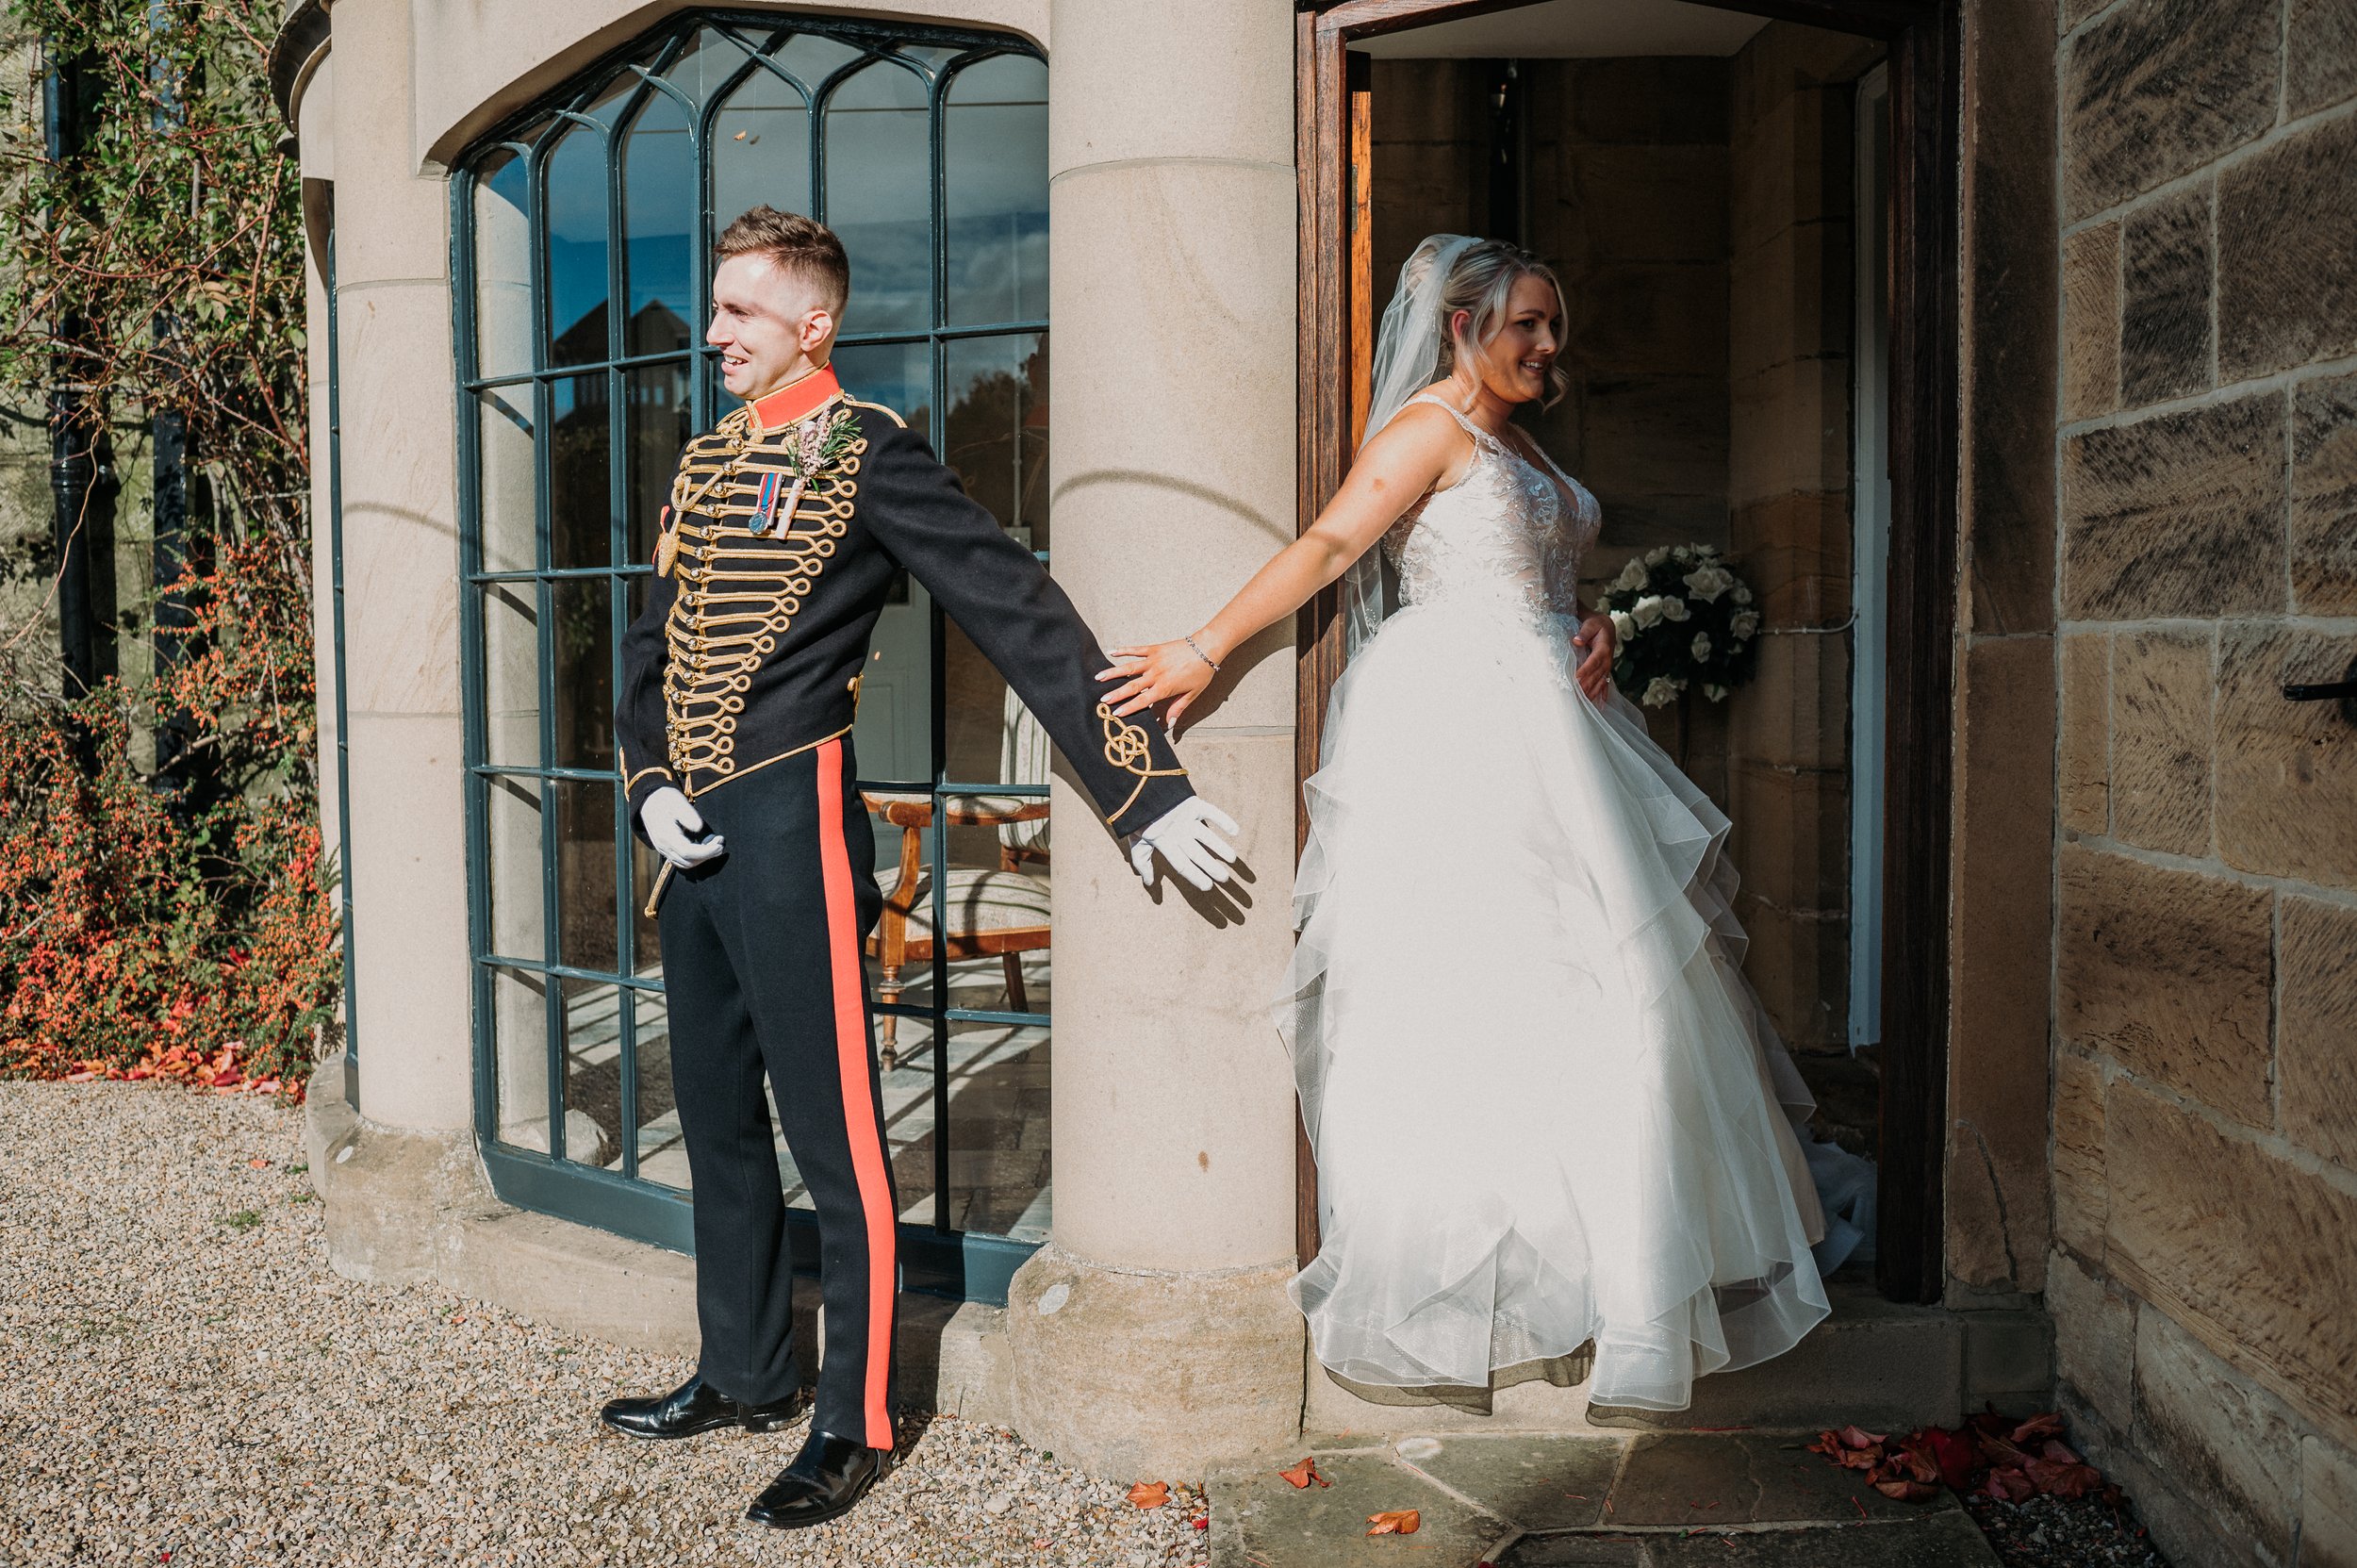 The bride and groom share their "first touch" around the corner at the castle whilst being careful not to catch a glimpse of each other before the ceremony.